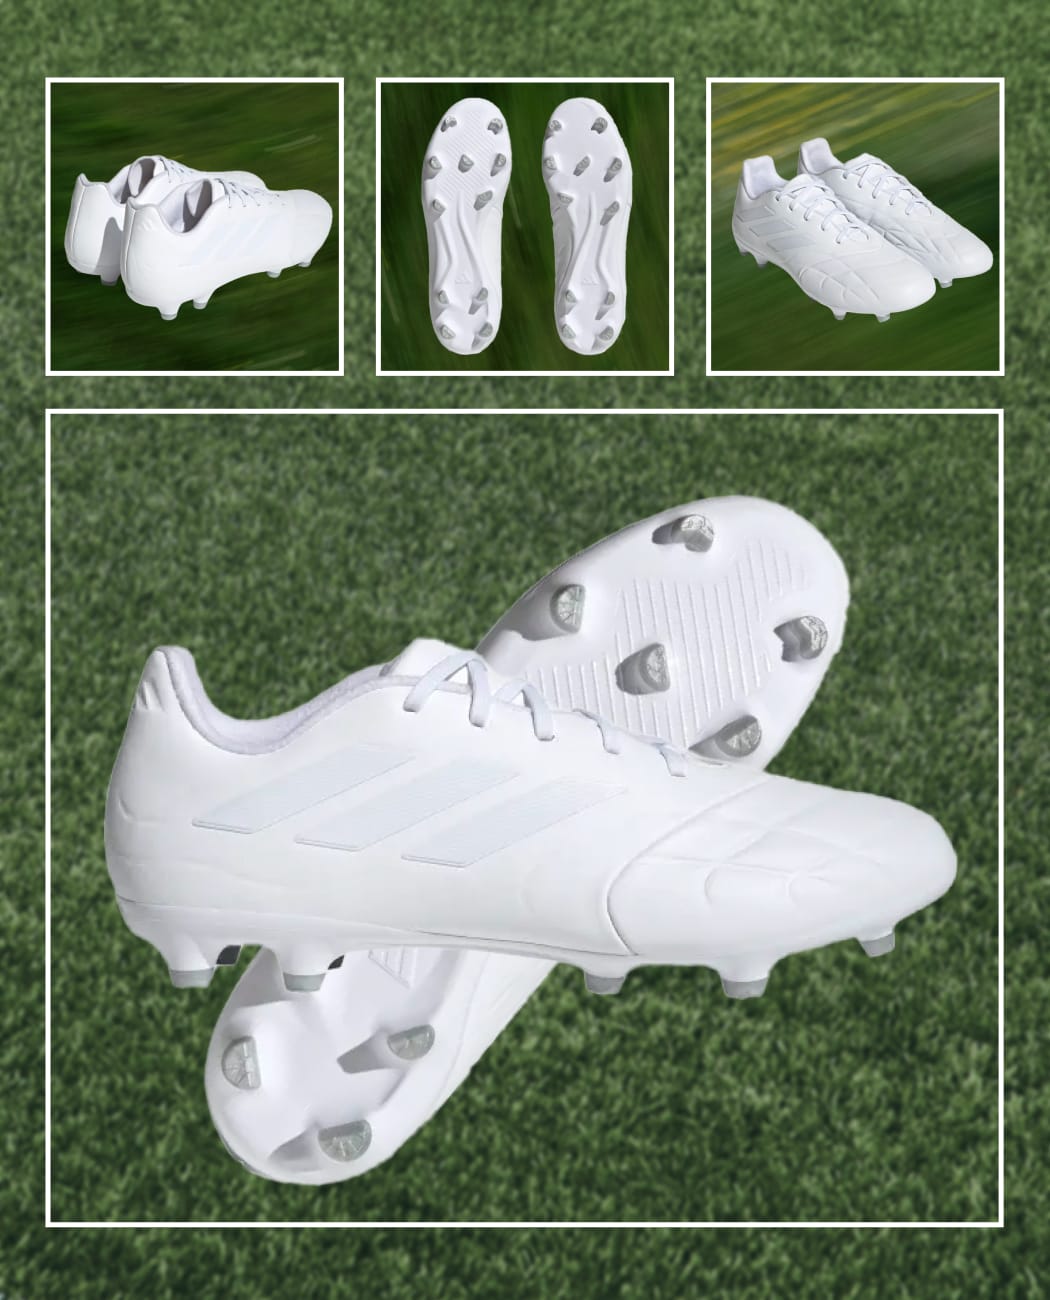 Soccer-Cleat-Buying-Guide-2023-Blog-Image-02